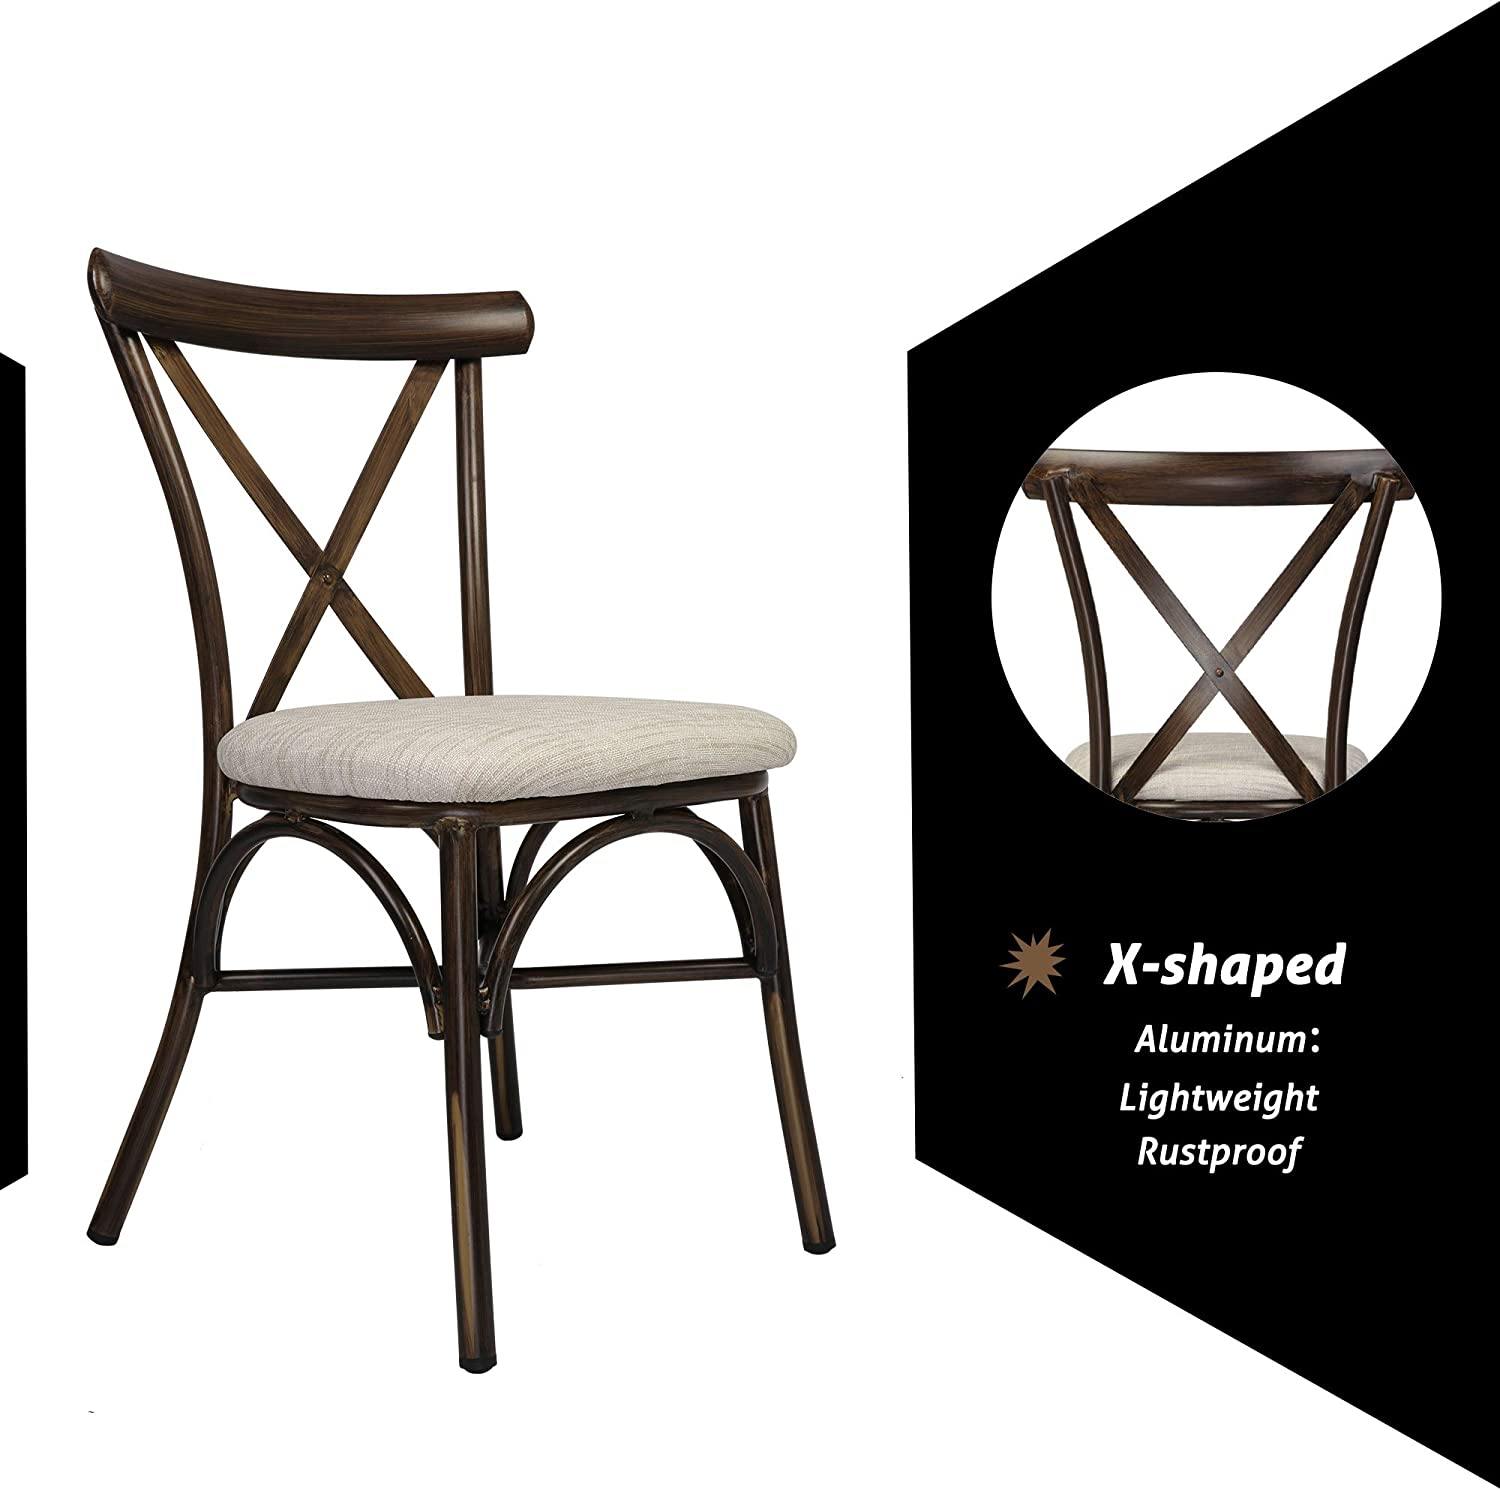 2 PCs Upholstered Dining Chair Set, Wood Top Metal Frame With X-Shape Padded Seat Modern Accent Chair For Home, Kitchen and Cafe Bar - Bosonshop